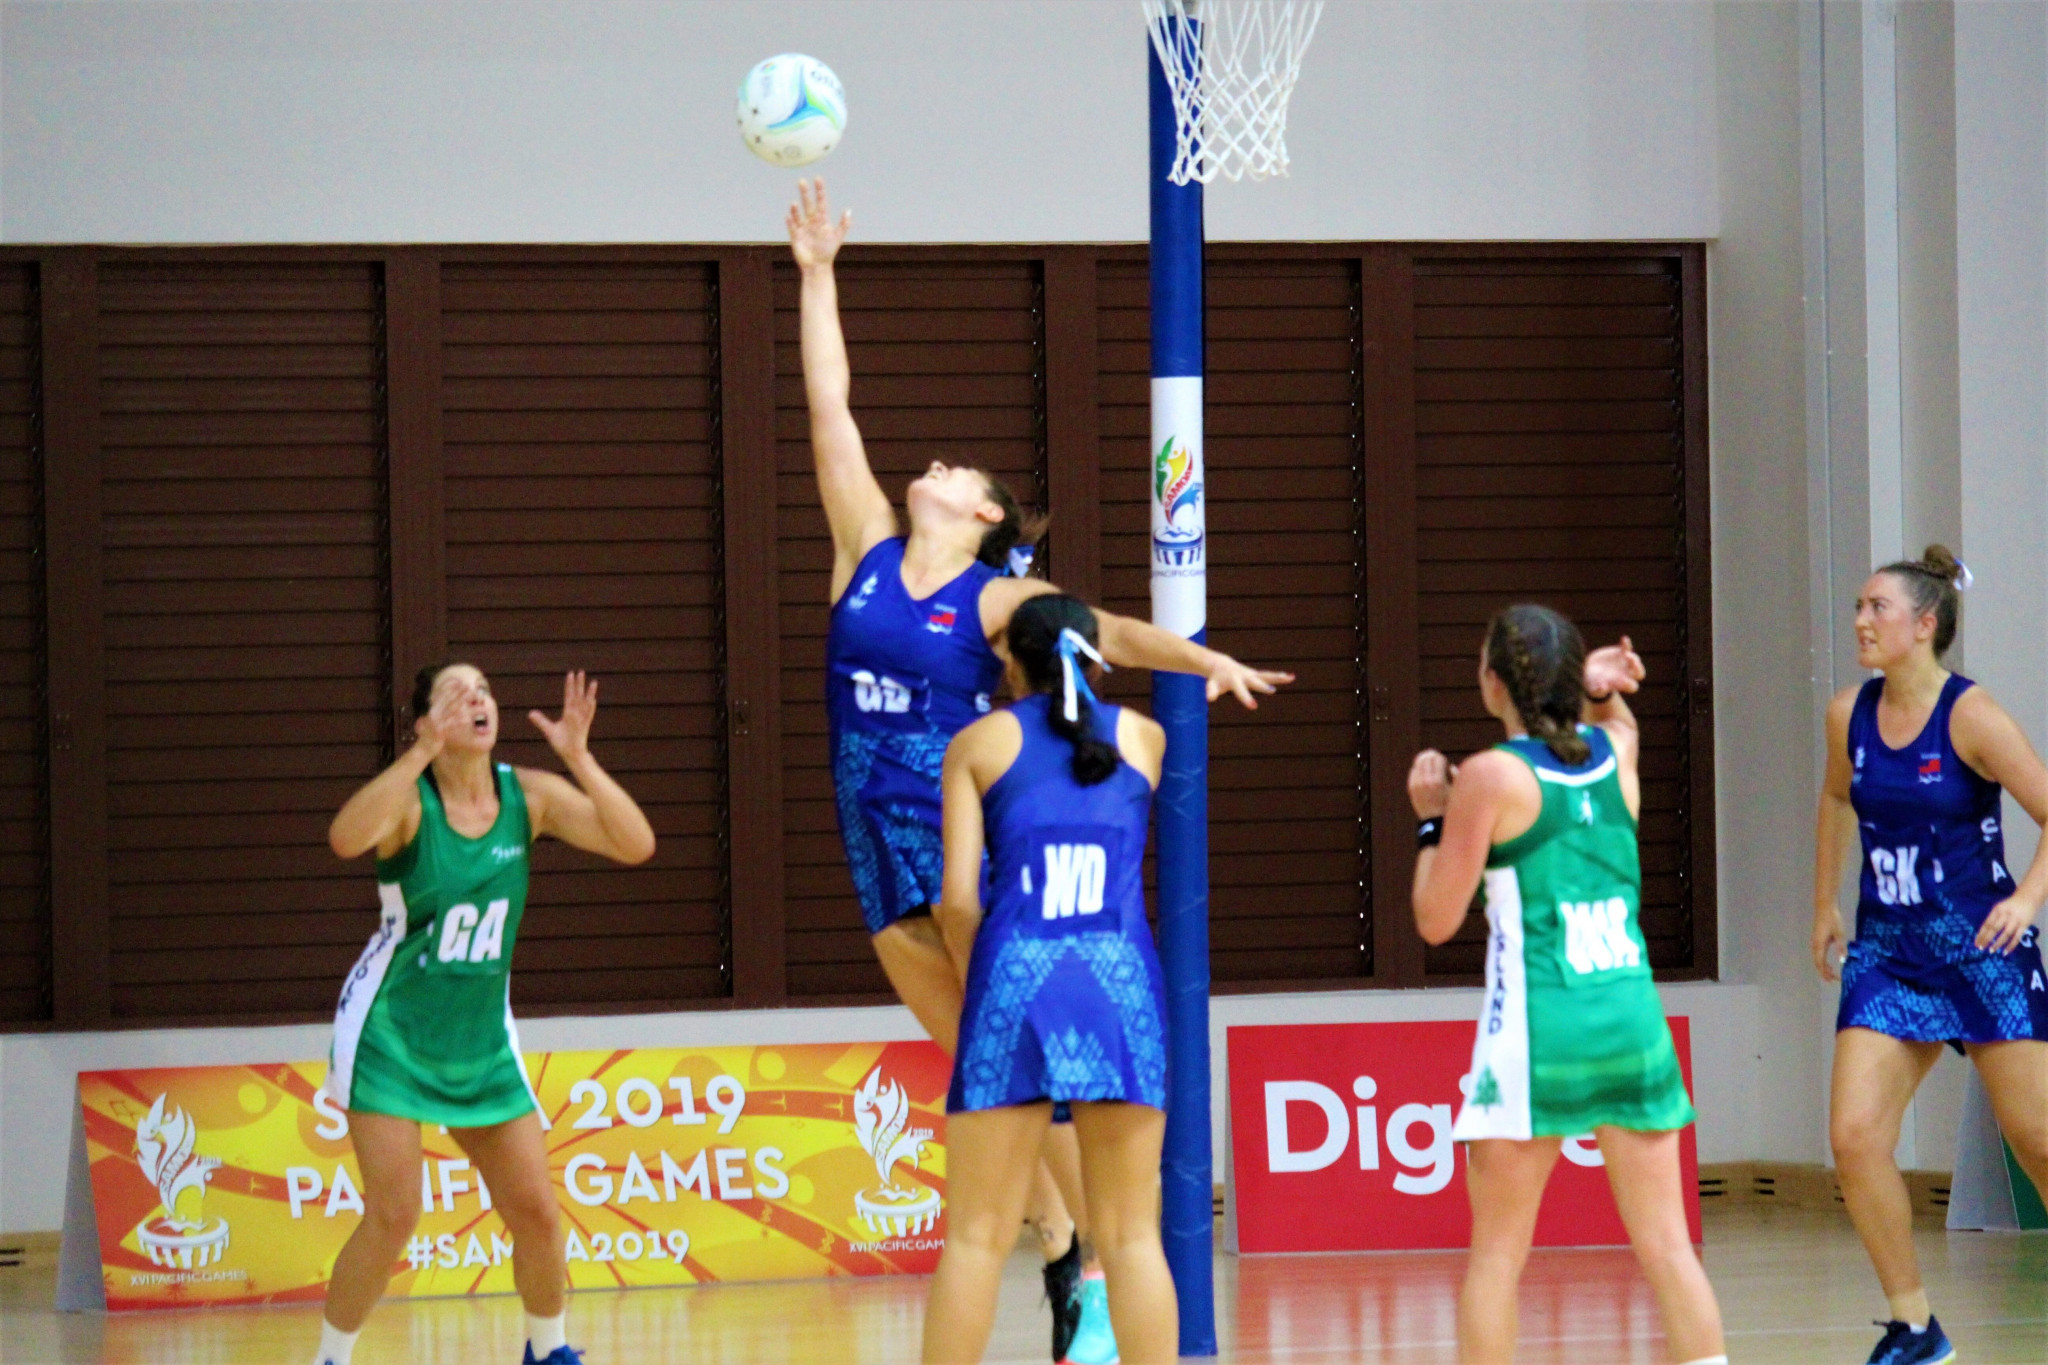 The multi-sport centre hosted the latest netball matches ©Pacific Games News Service